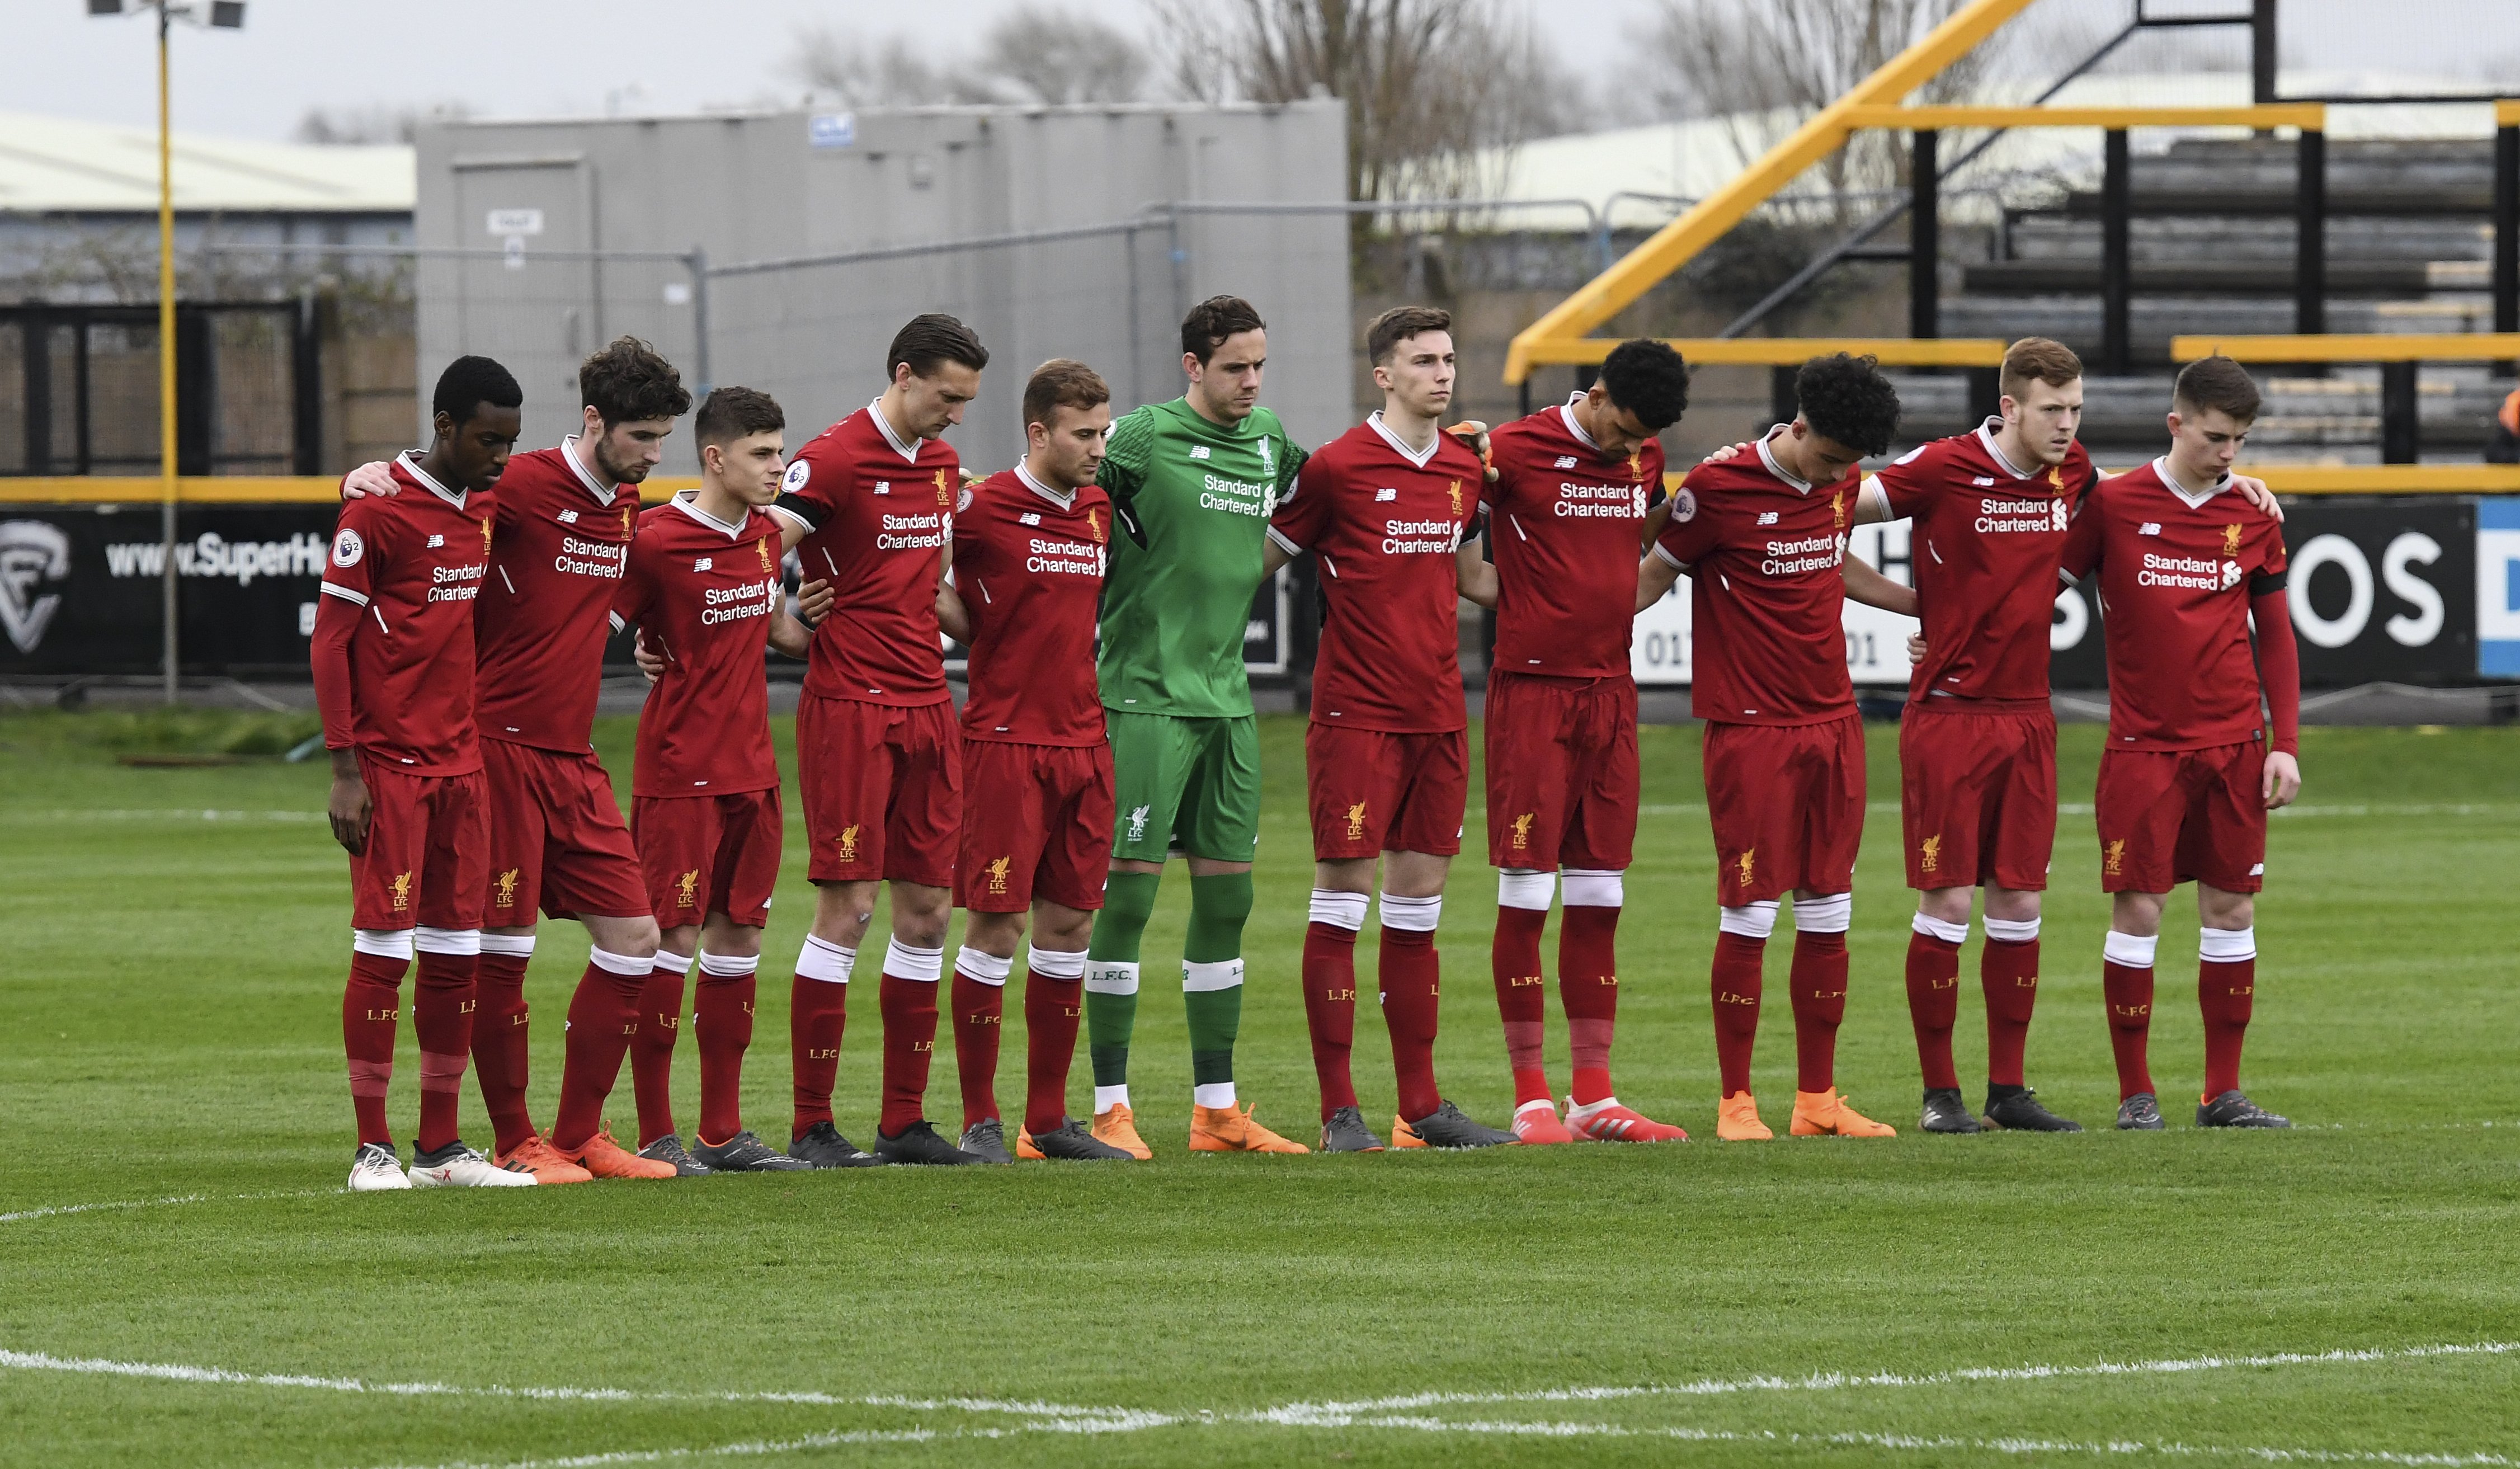 The Liverpool players observe a minute silence for the victims of the Hillsborough disaster on April 16, 2018 in Southport, England. | Source: Getty Images